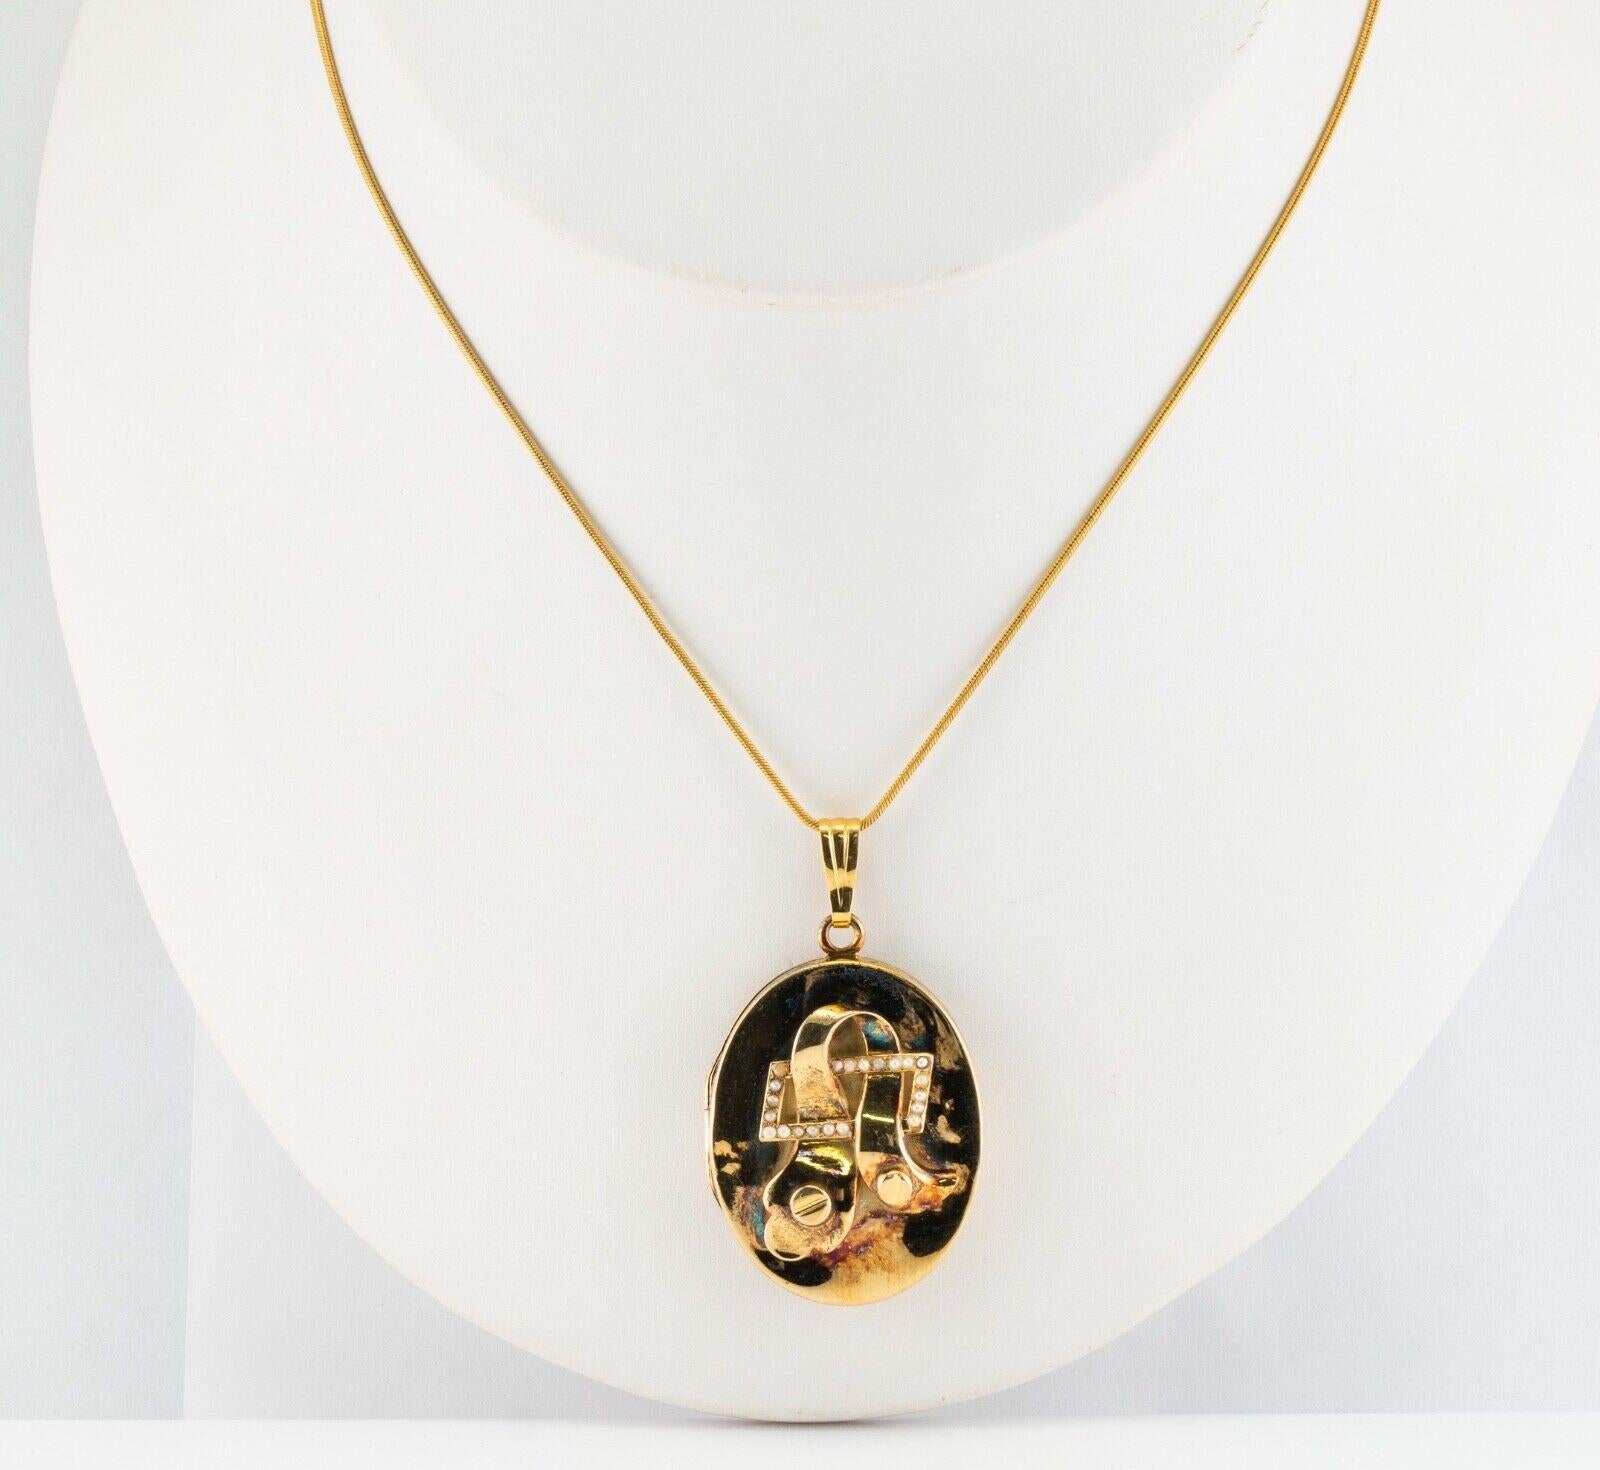 This gorgeous vintage locket/ pendant is finely crafted in solid 14K Yellow Gold (carefully tested and guaranteed) and set with Natural genuine freshwater 0.8mm each seed pearls . The pendant (when closed) measures 1-5/16